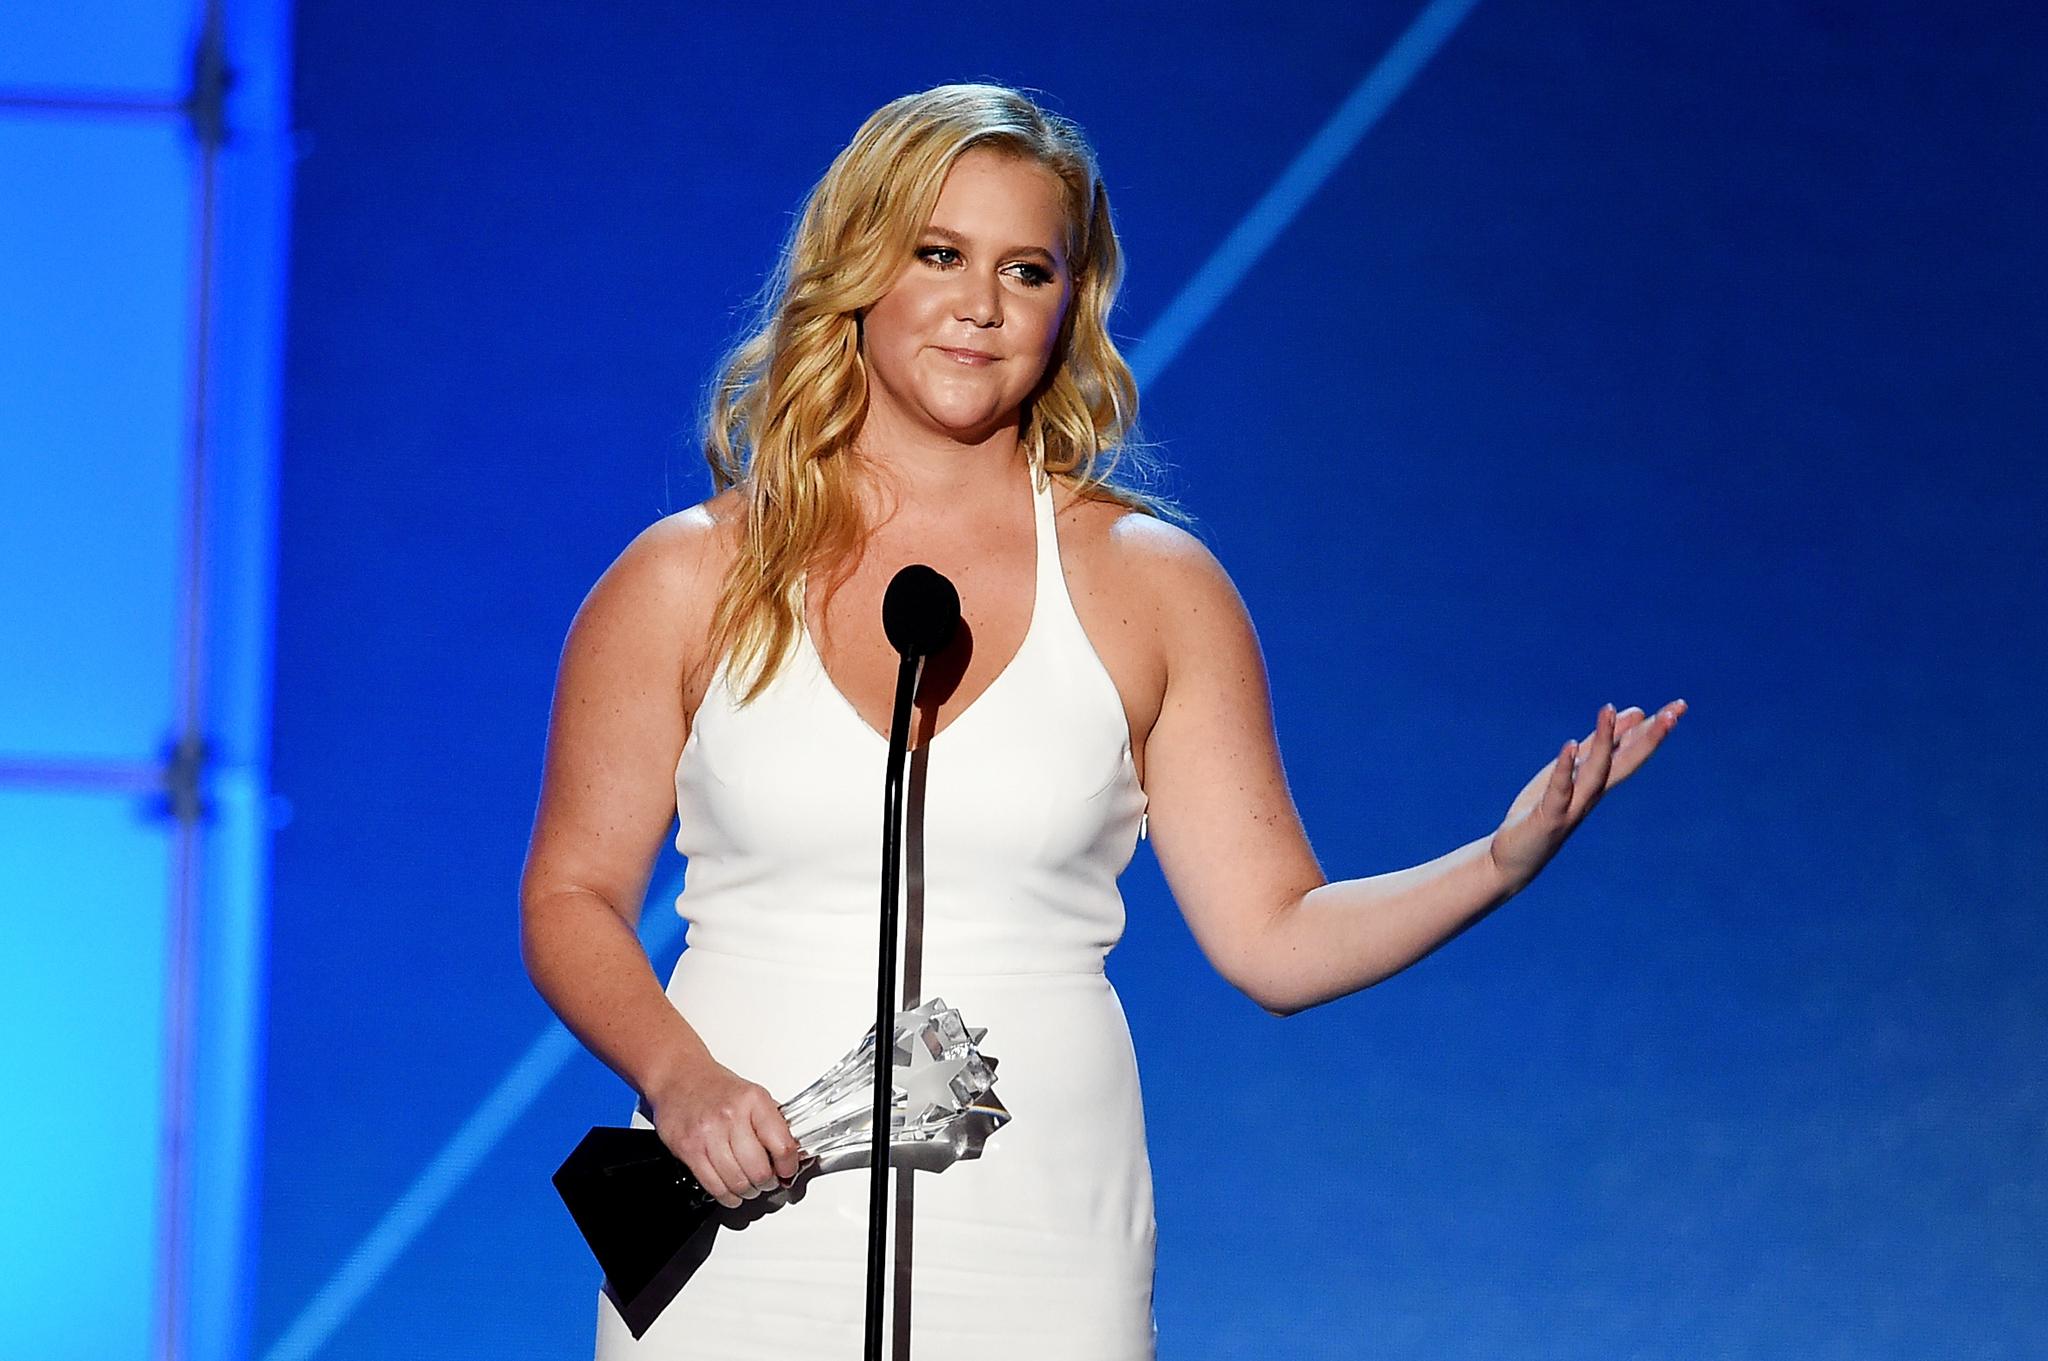 Amy Schumer has said that being a female comic is an act of feminism as it implies that ‘a woman’s comedic voice is as valuable as a man’s’